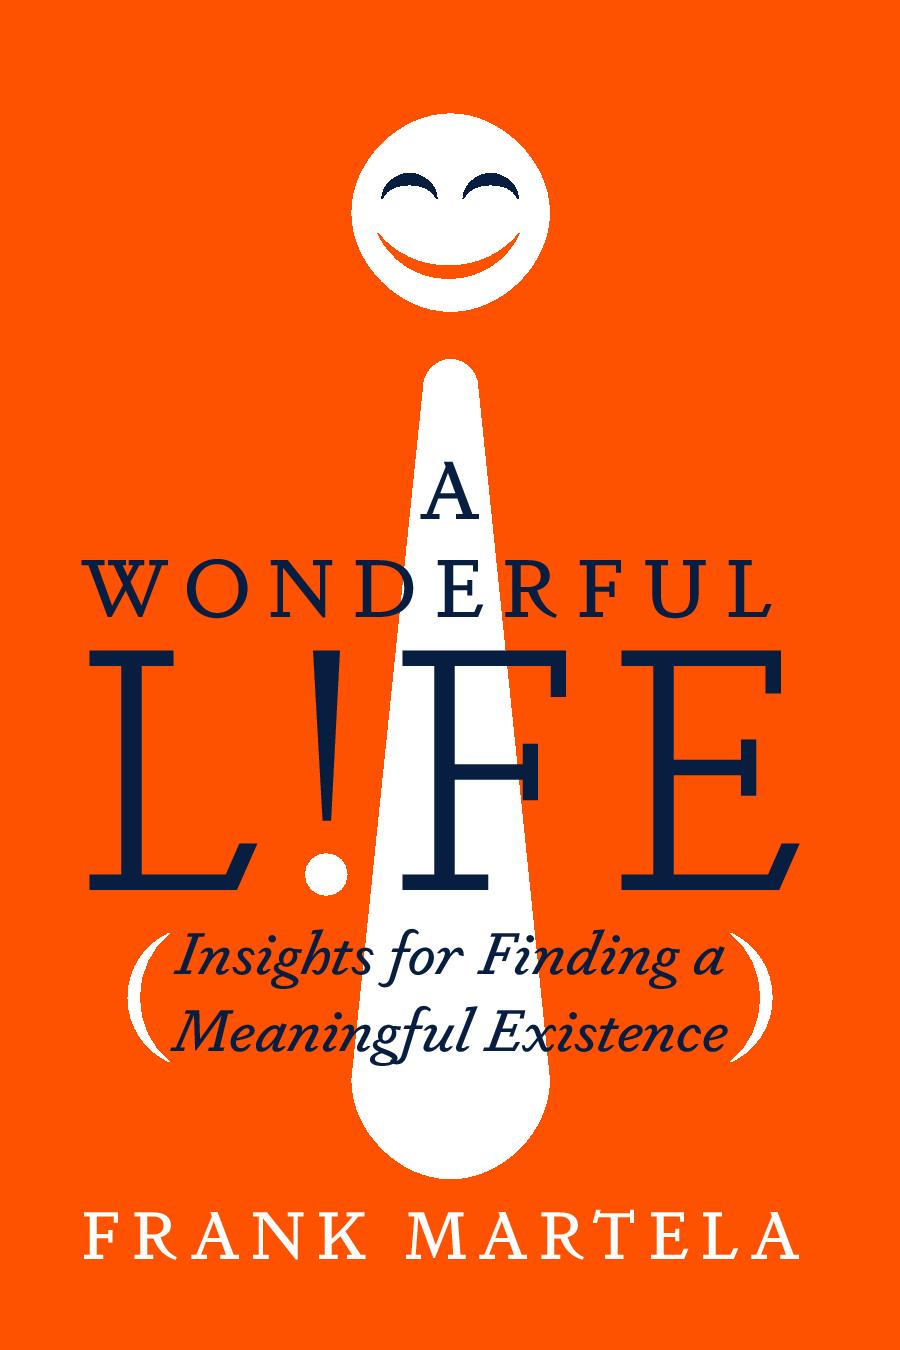 A Wonderful Life:  Insights on Finding a Meaningful Existence